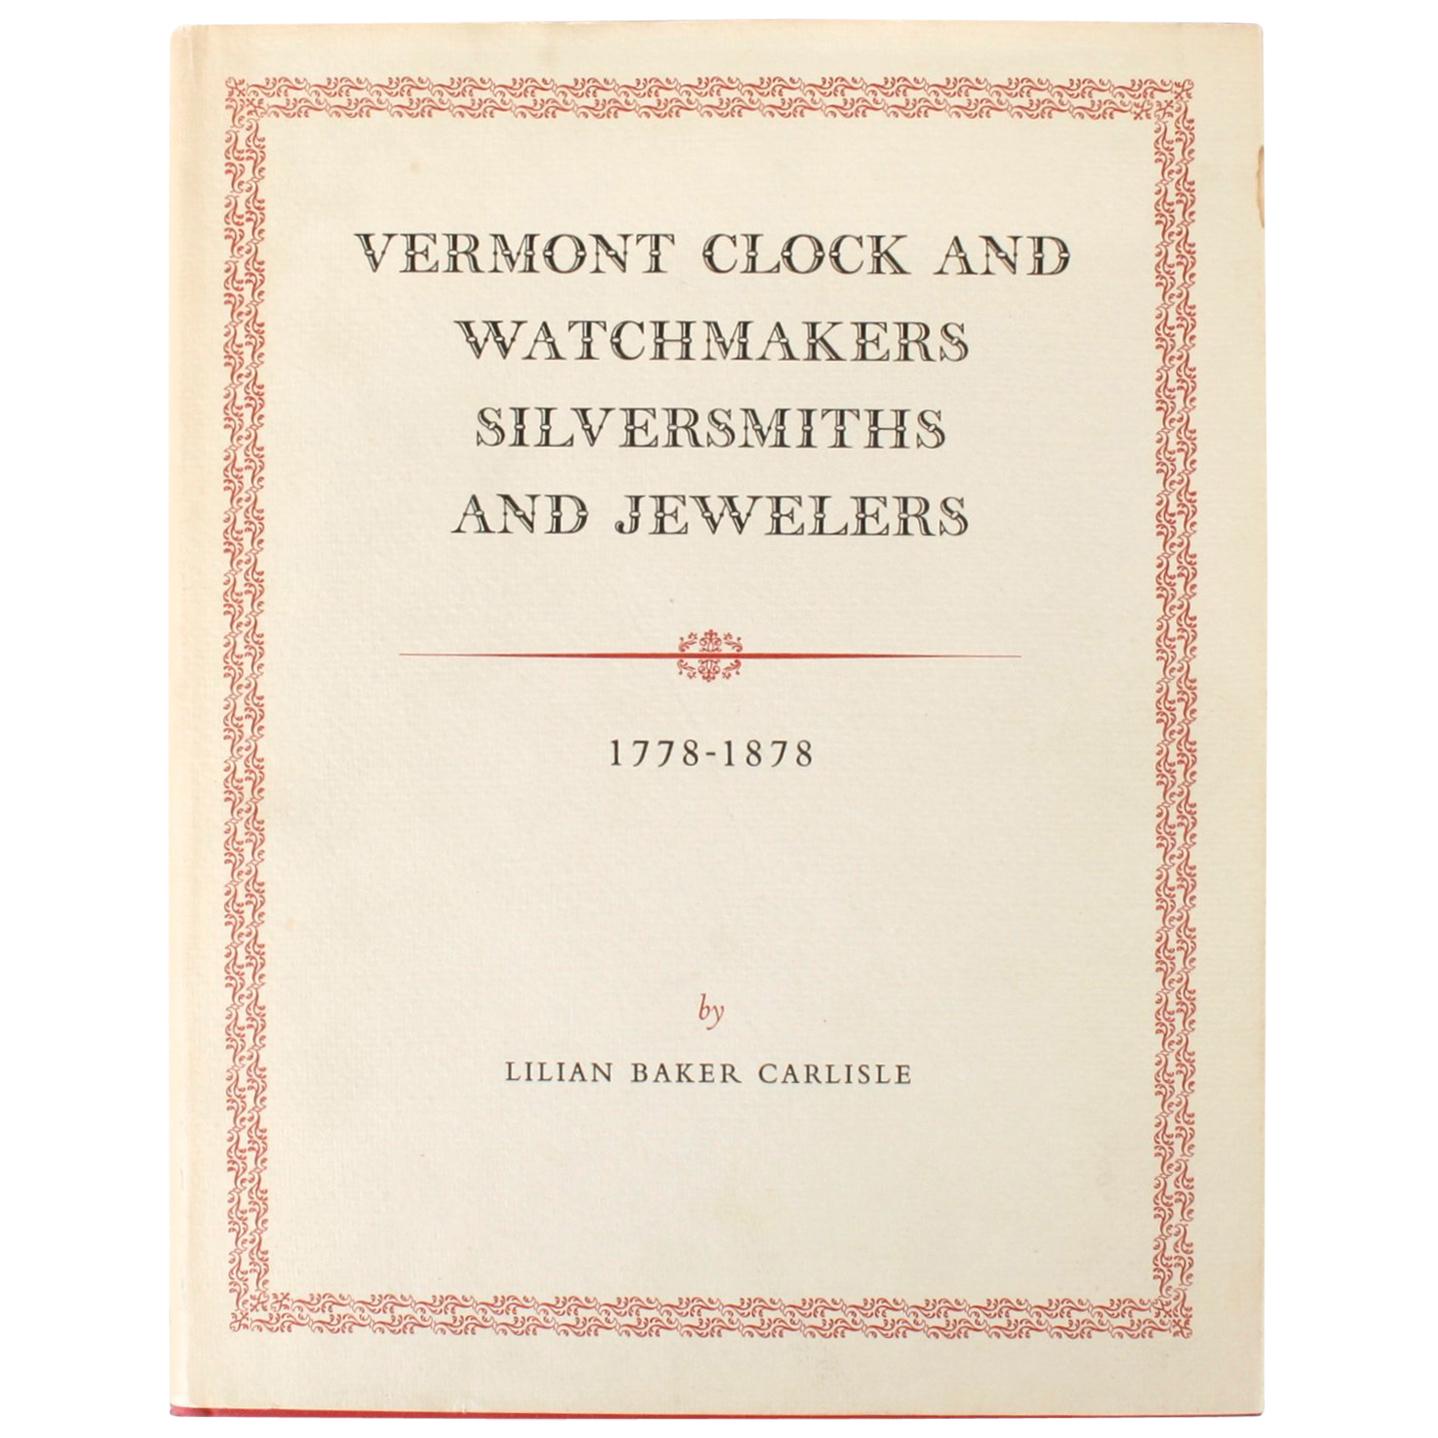 Vermont Clock & Watchmakers, Silversmiths, & Jewelers, 1778-1878, Signed Ltd Ed